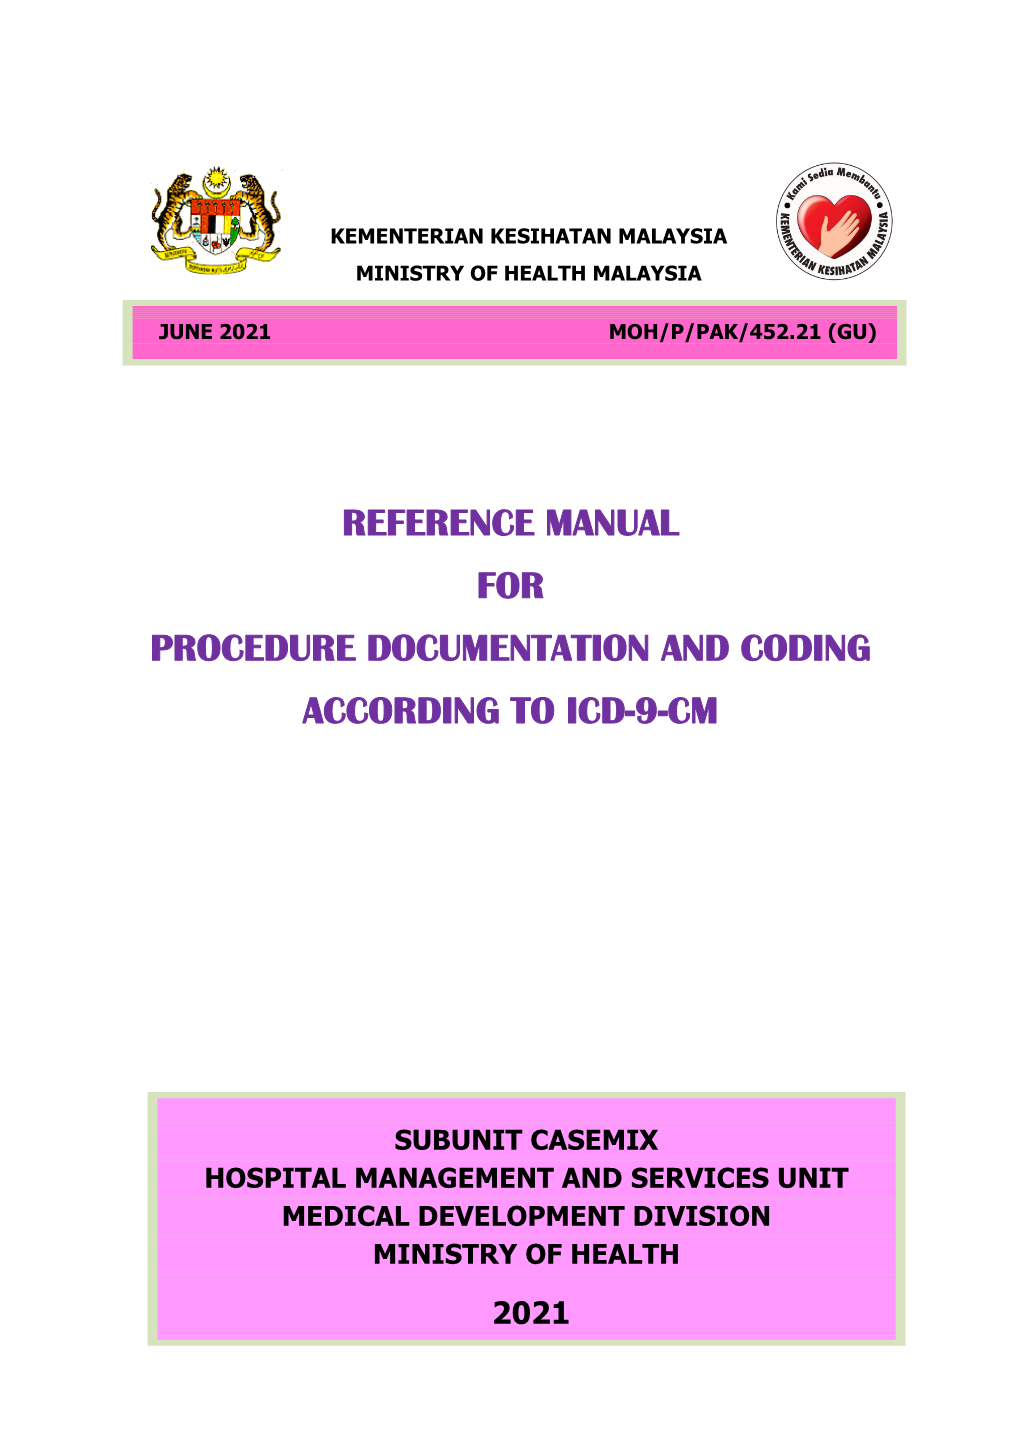 Reference Manual for Procedure Documentation and Coding According to Icd-9-Cm